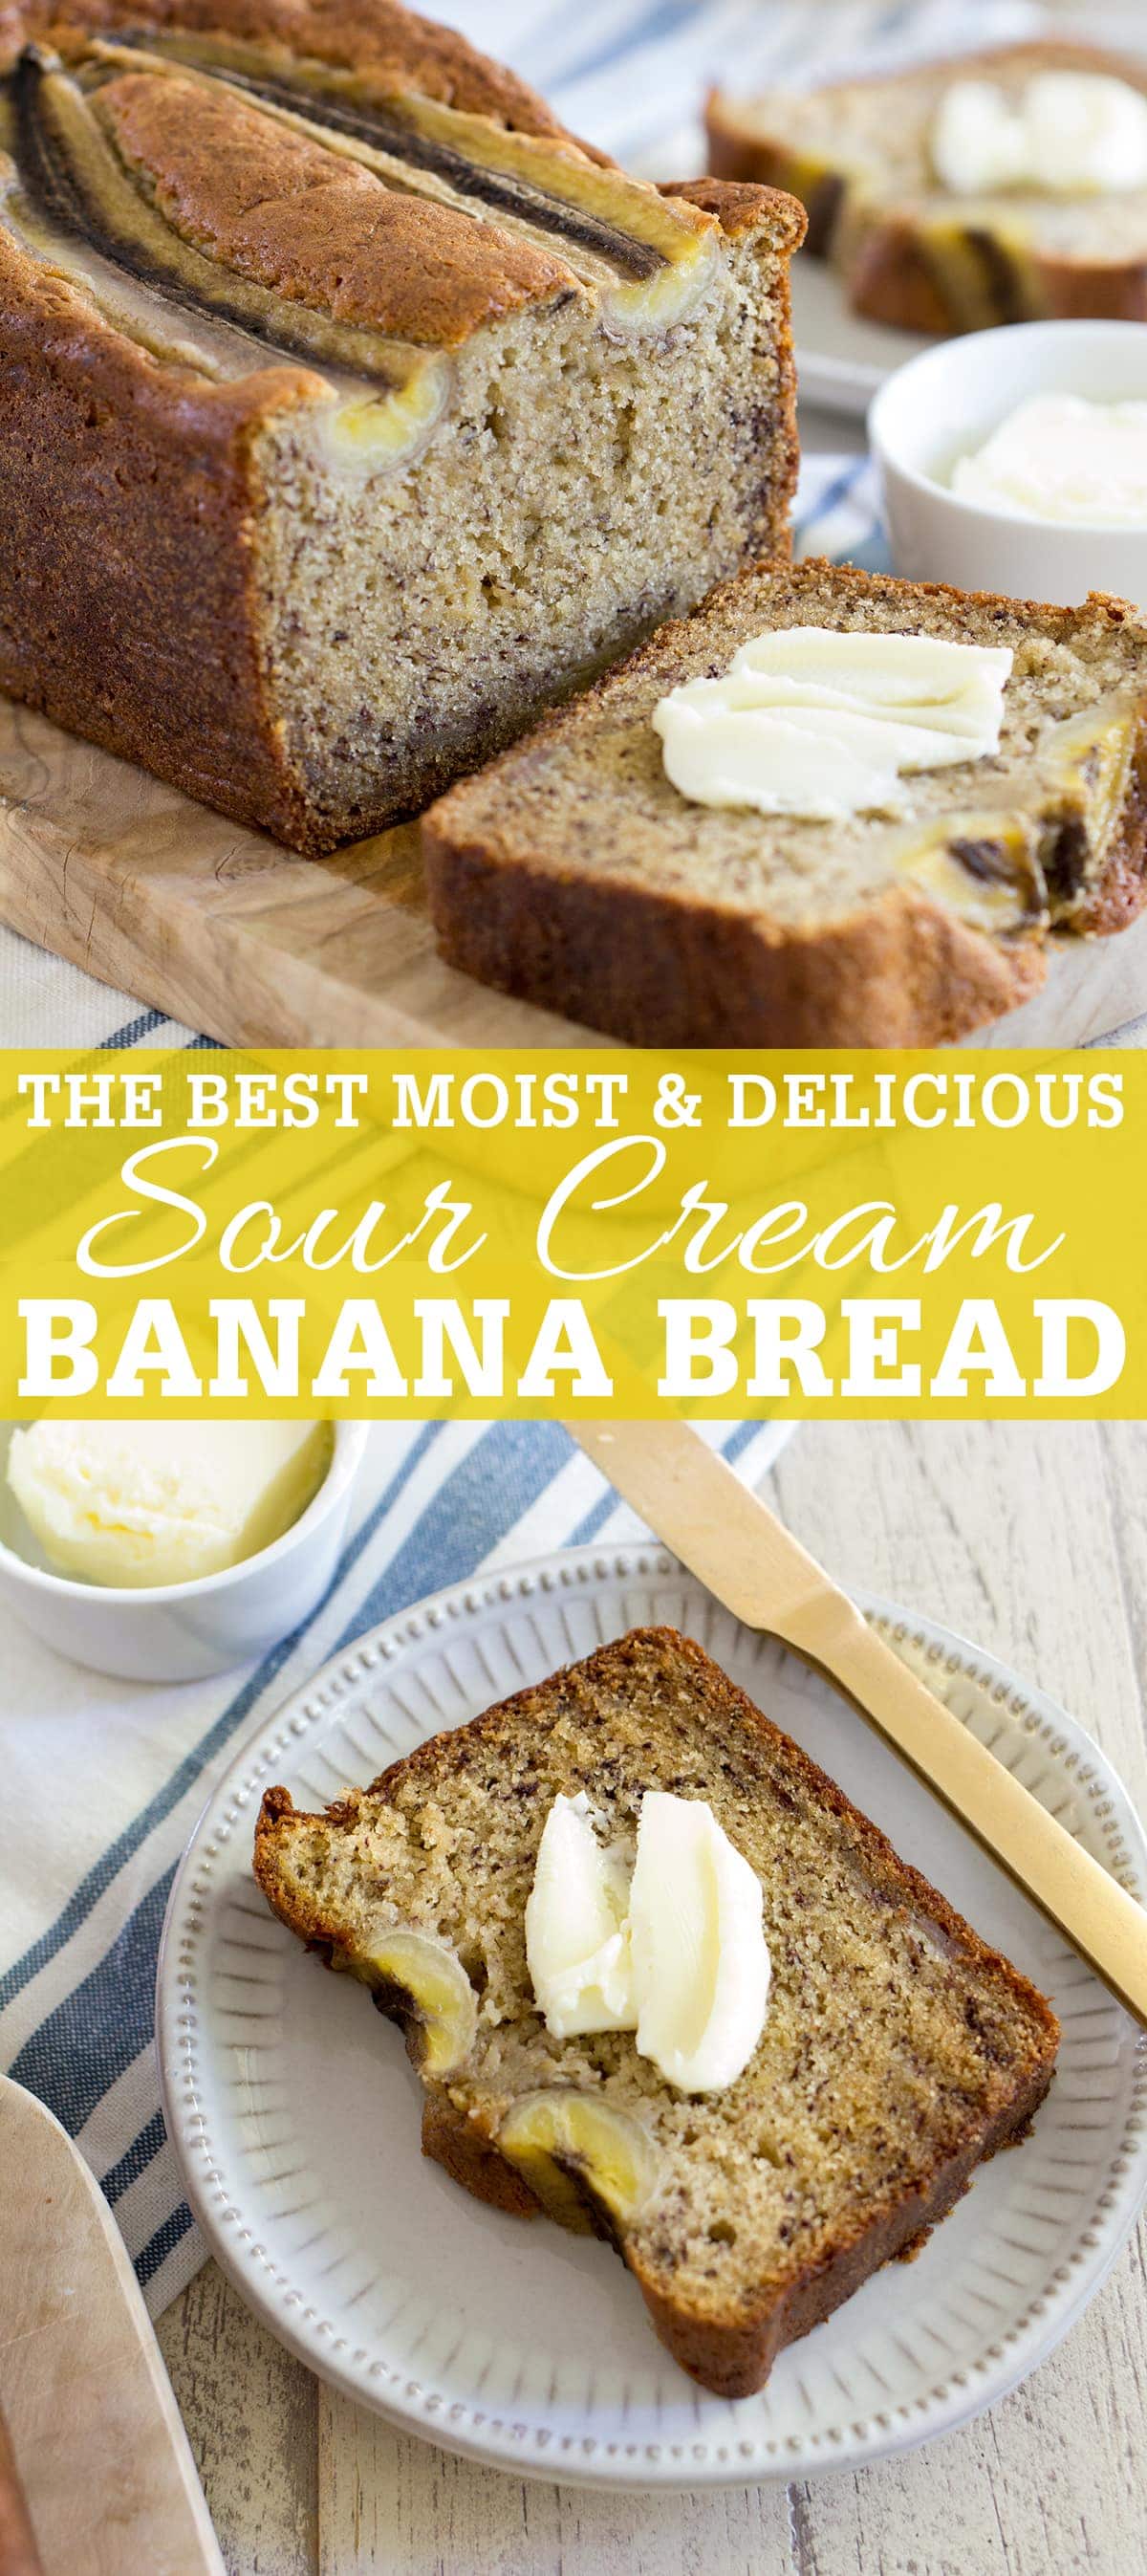 This recipe is for the very best sour cream banana bread that is very moist, flavorful and delicious! The pefect classic banana bread.